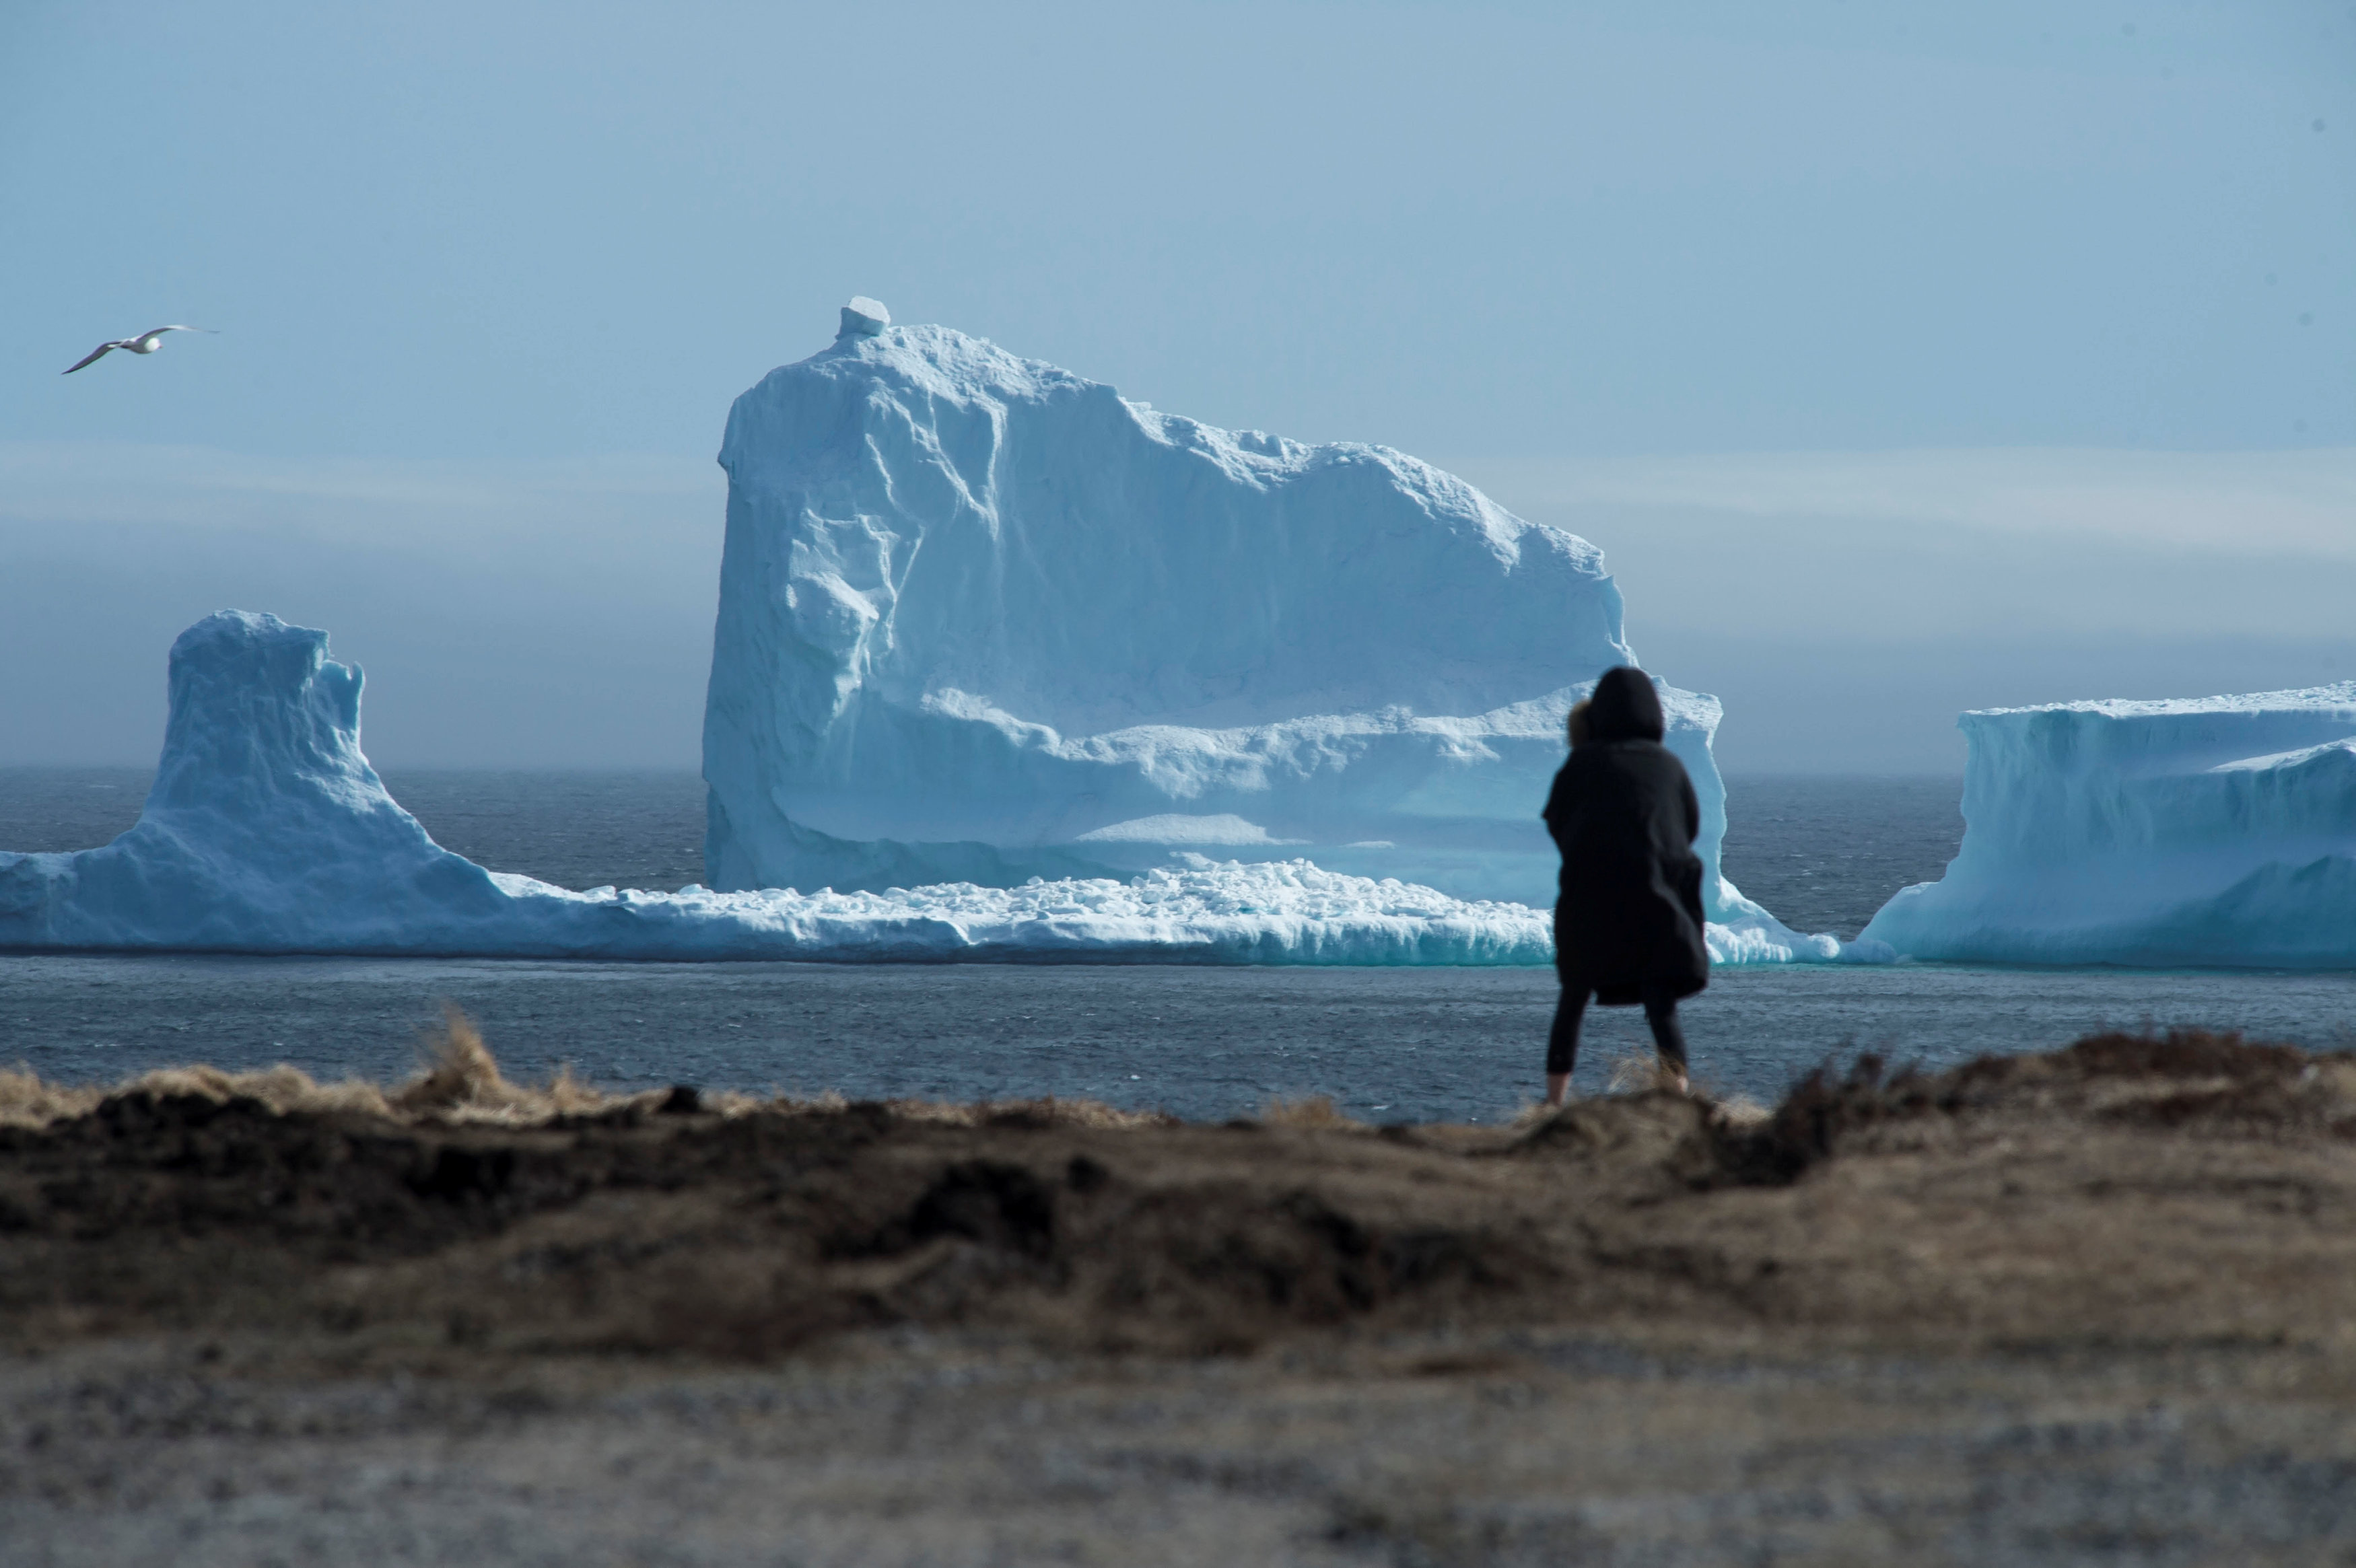 A resident views the first iceberg of the season as it passes the South Shore, also known as "Iceberg Alley", near Ferryland Newfoundland, Canada April 16, 2017. Picture taken April 16, 2017. REUTERS/Greg Locke